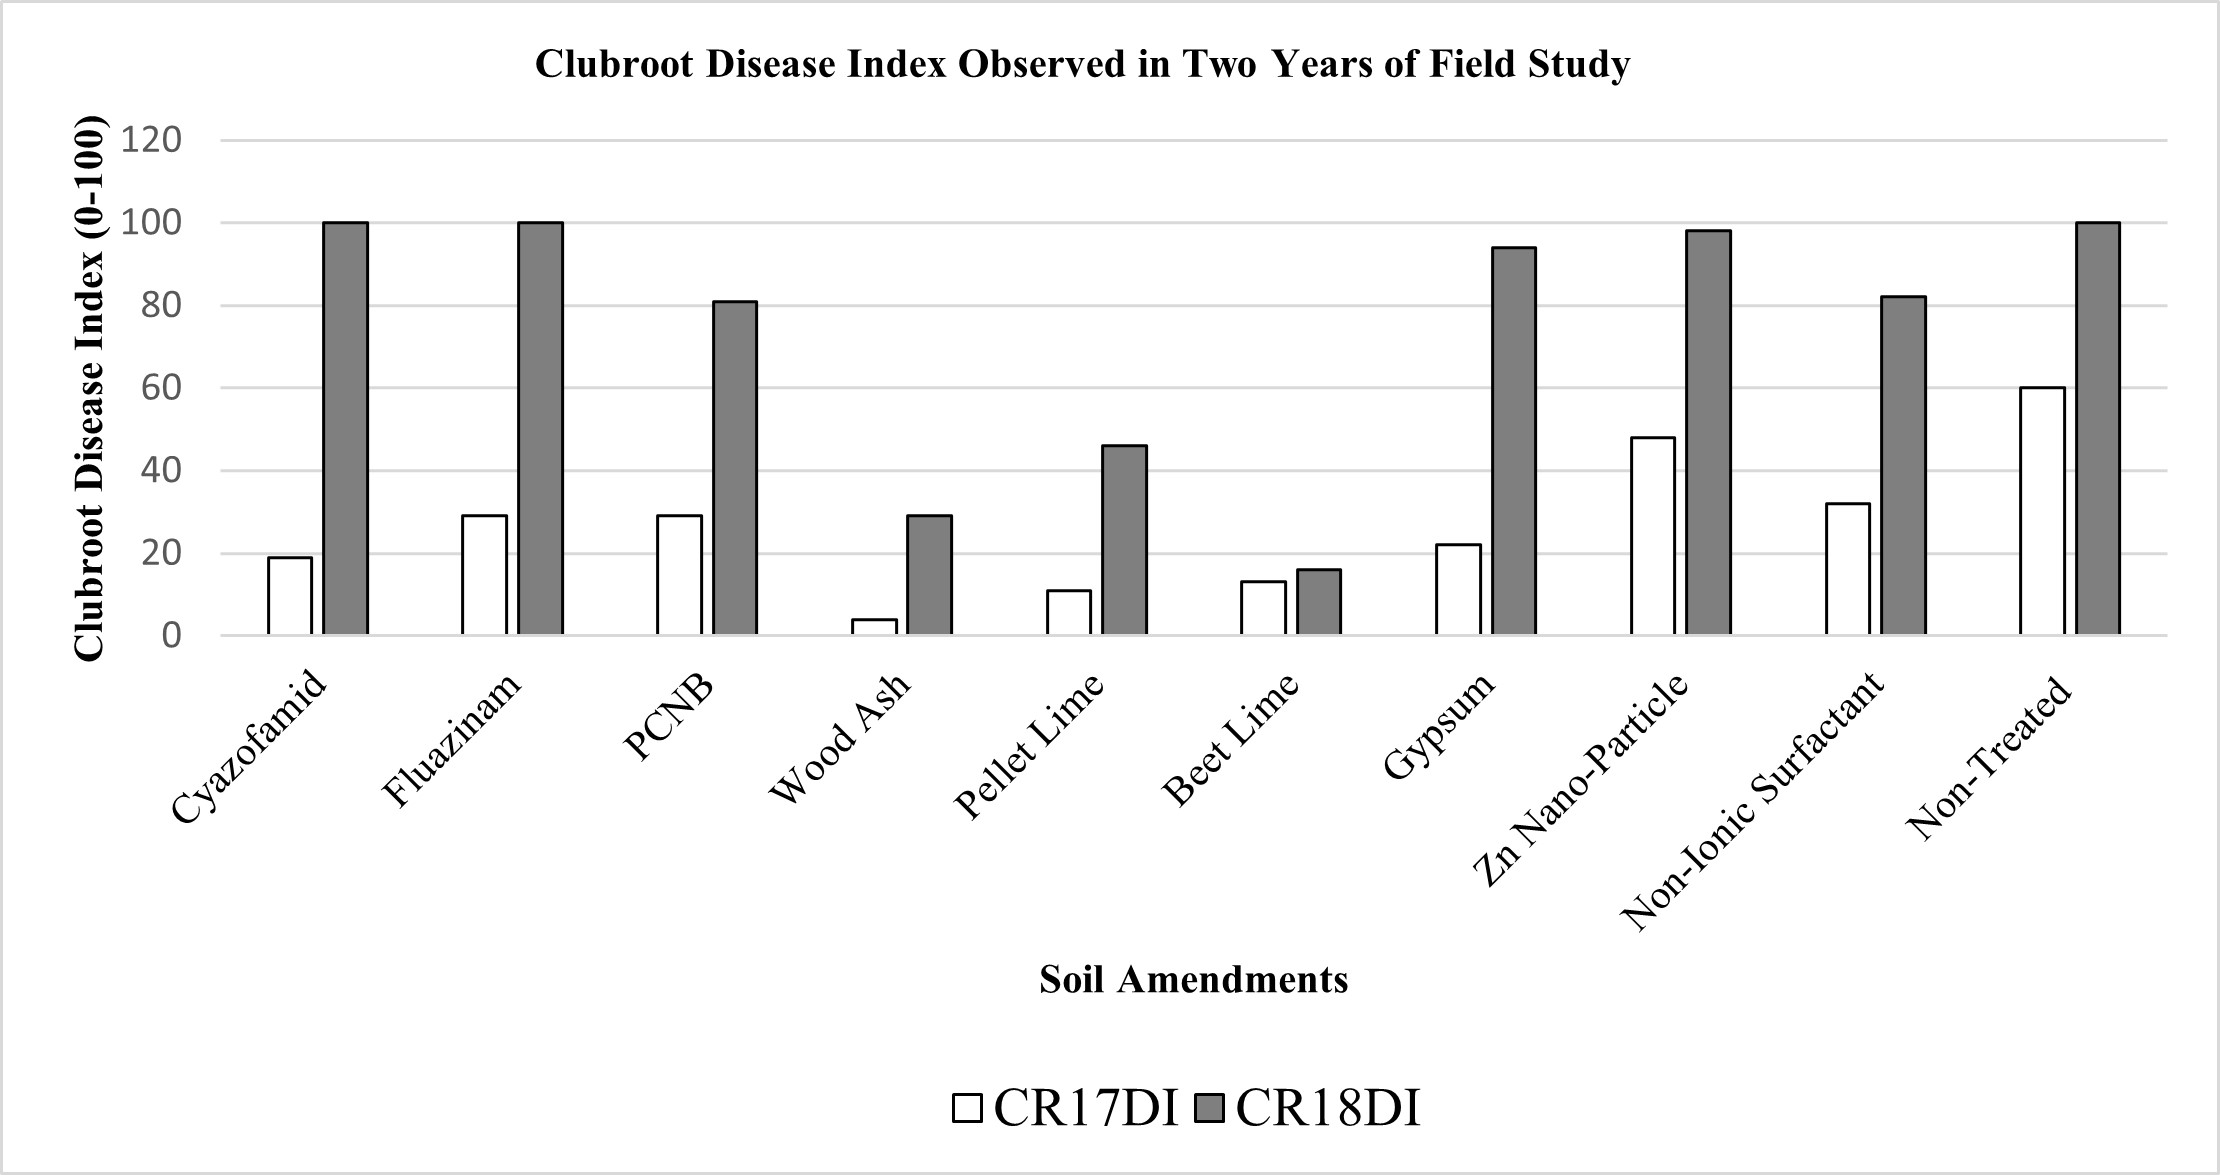 Efficacy of soil amendments to manage clubroot incidence in field conditions.